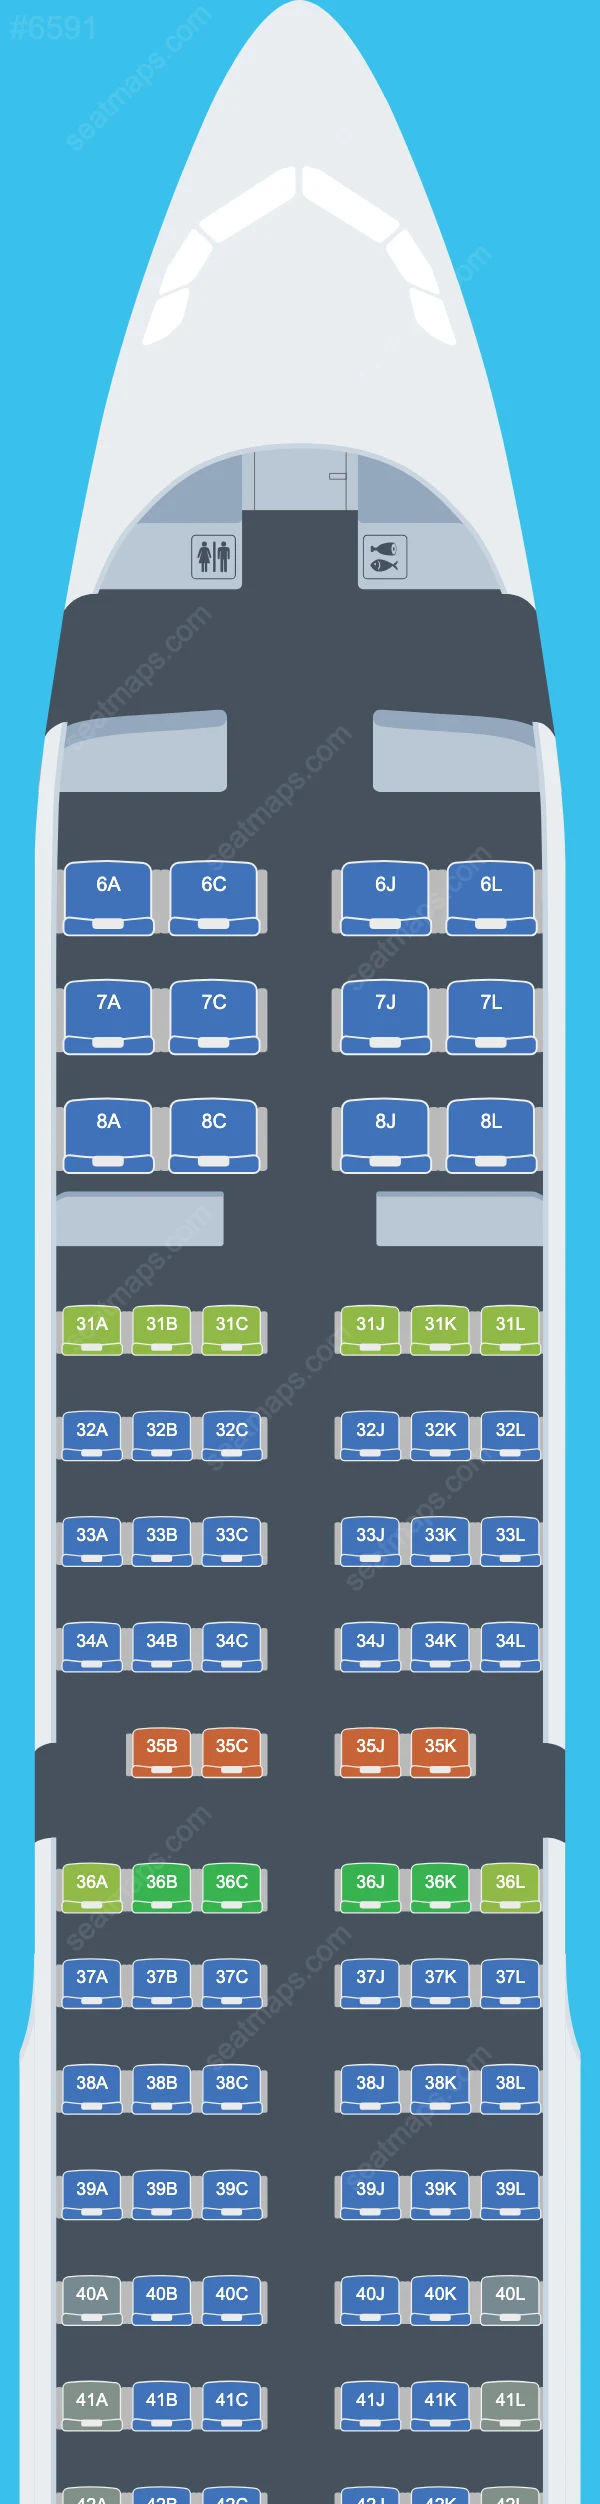 China Eastern Airbus A321-200 V.1 seatmap mobile preview